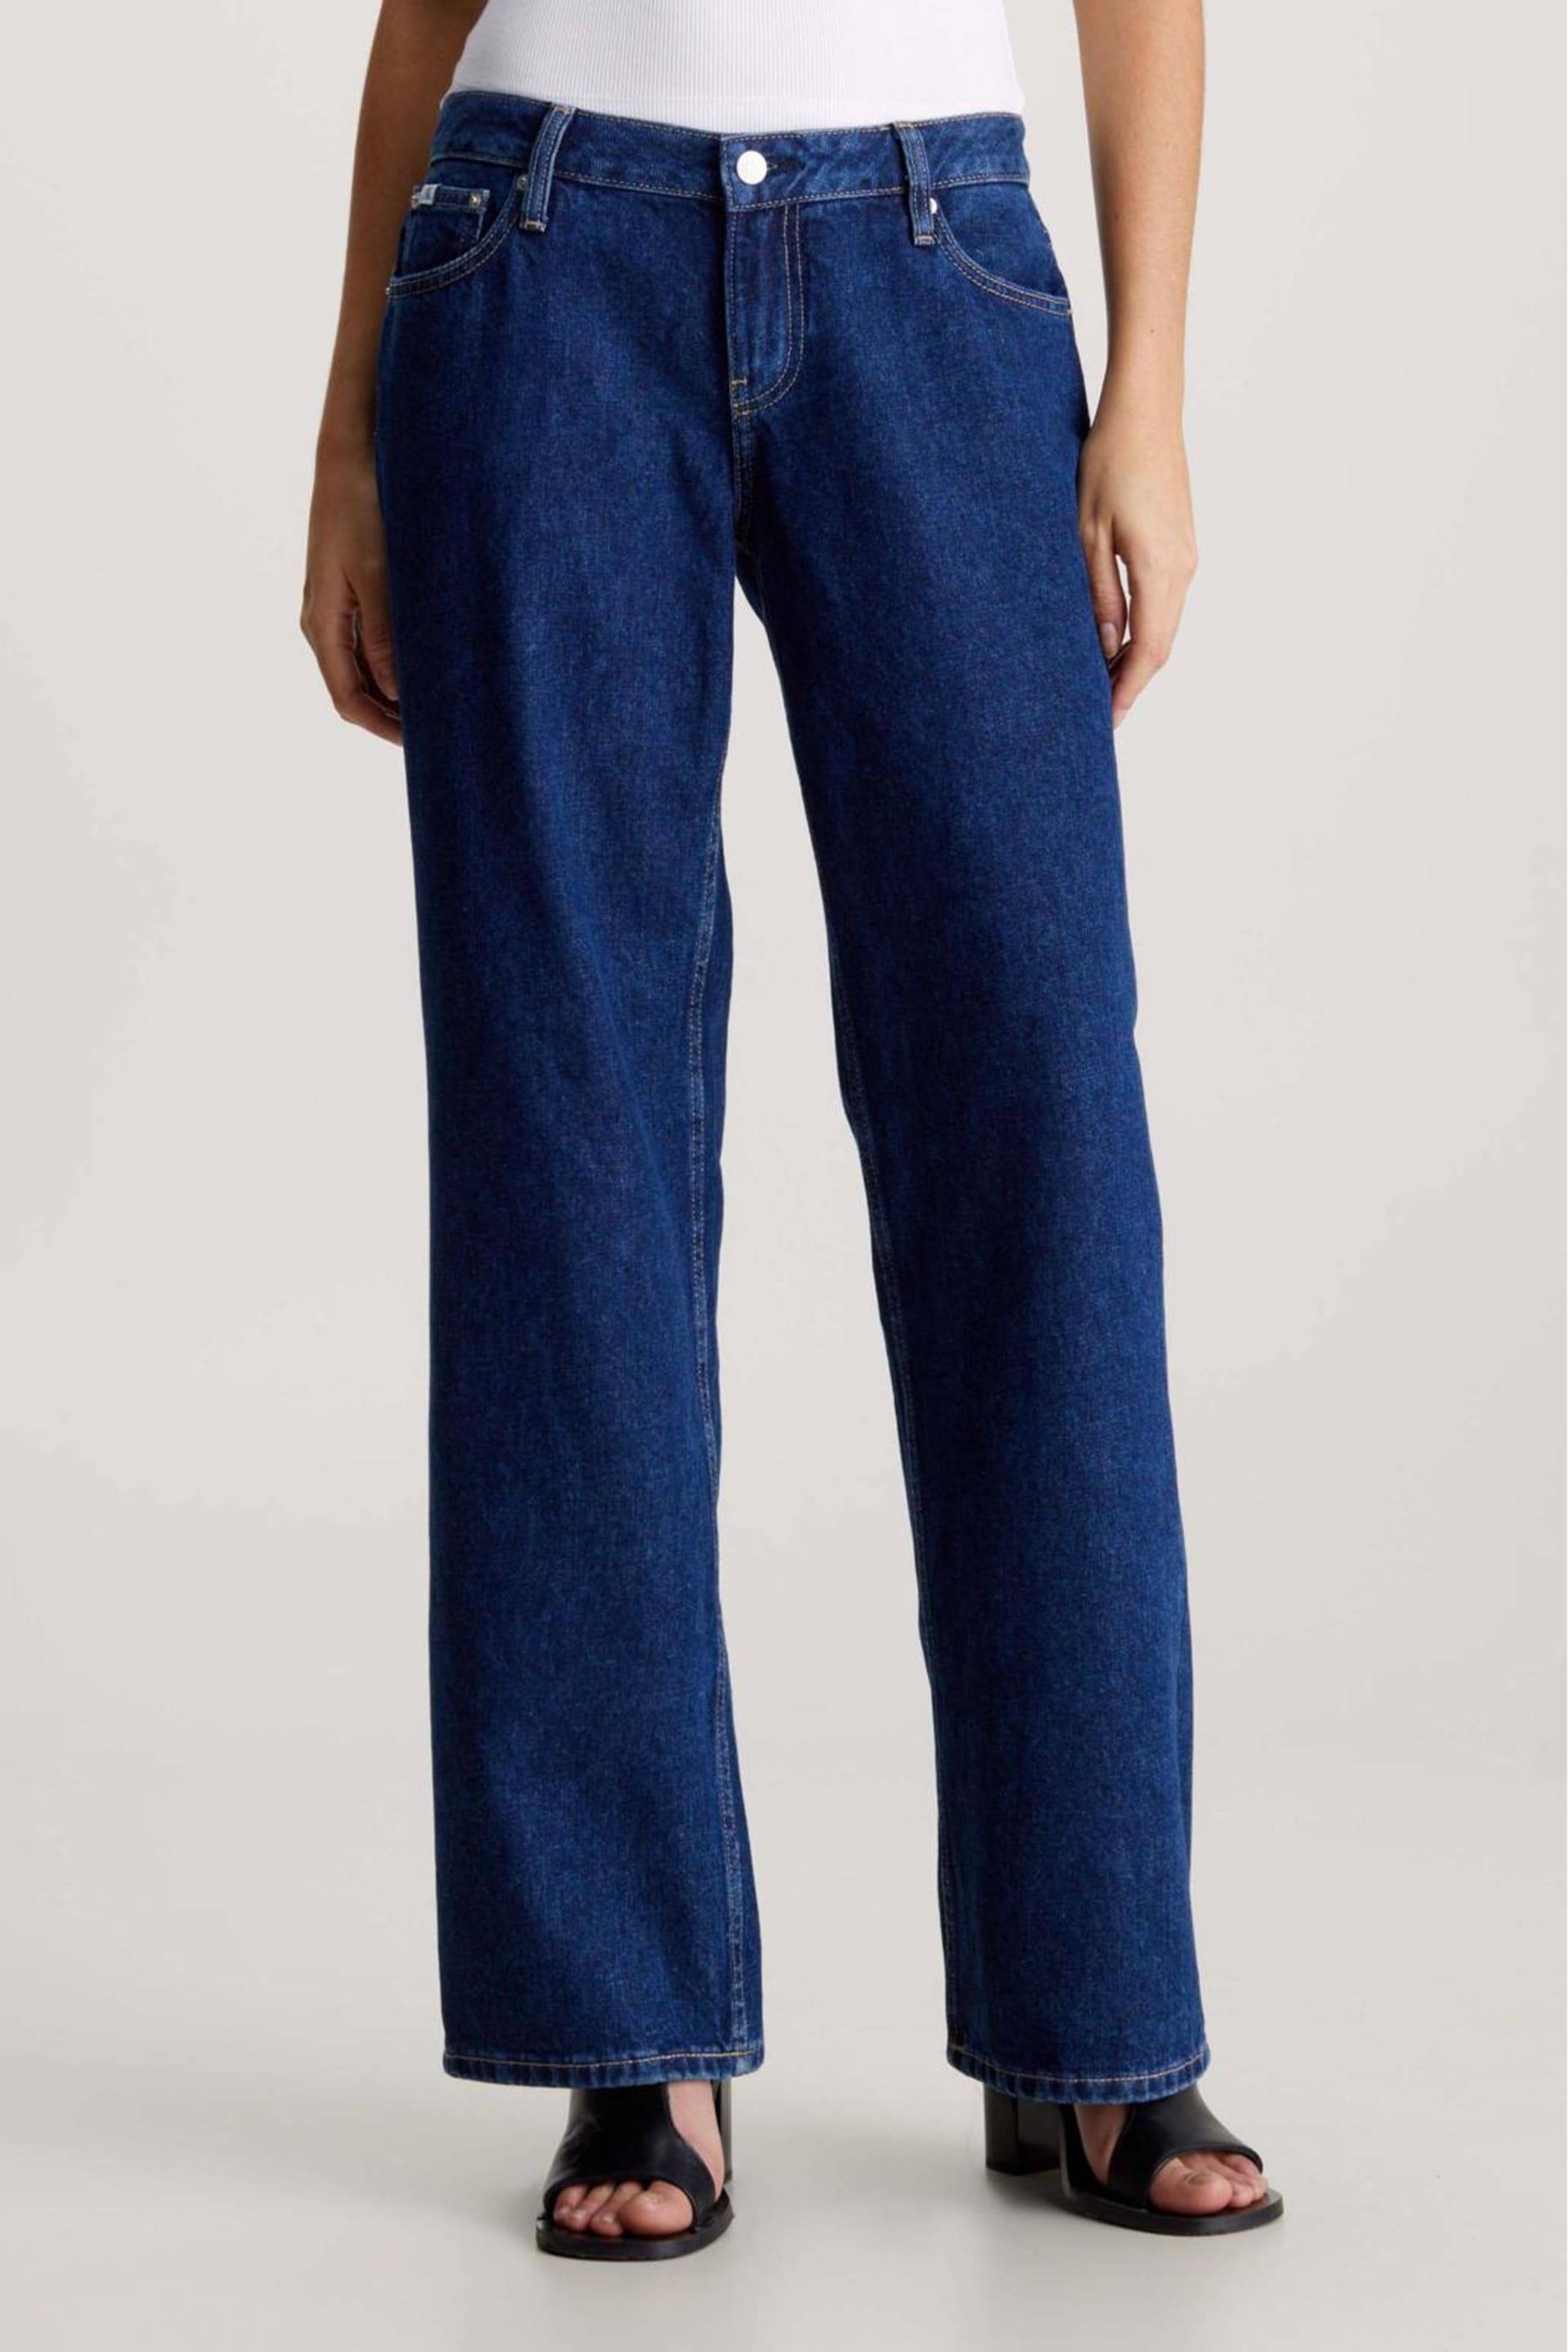 Calvin Klein Blue Low Rise Baggy Jeans - Image 1 of 5